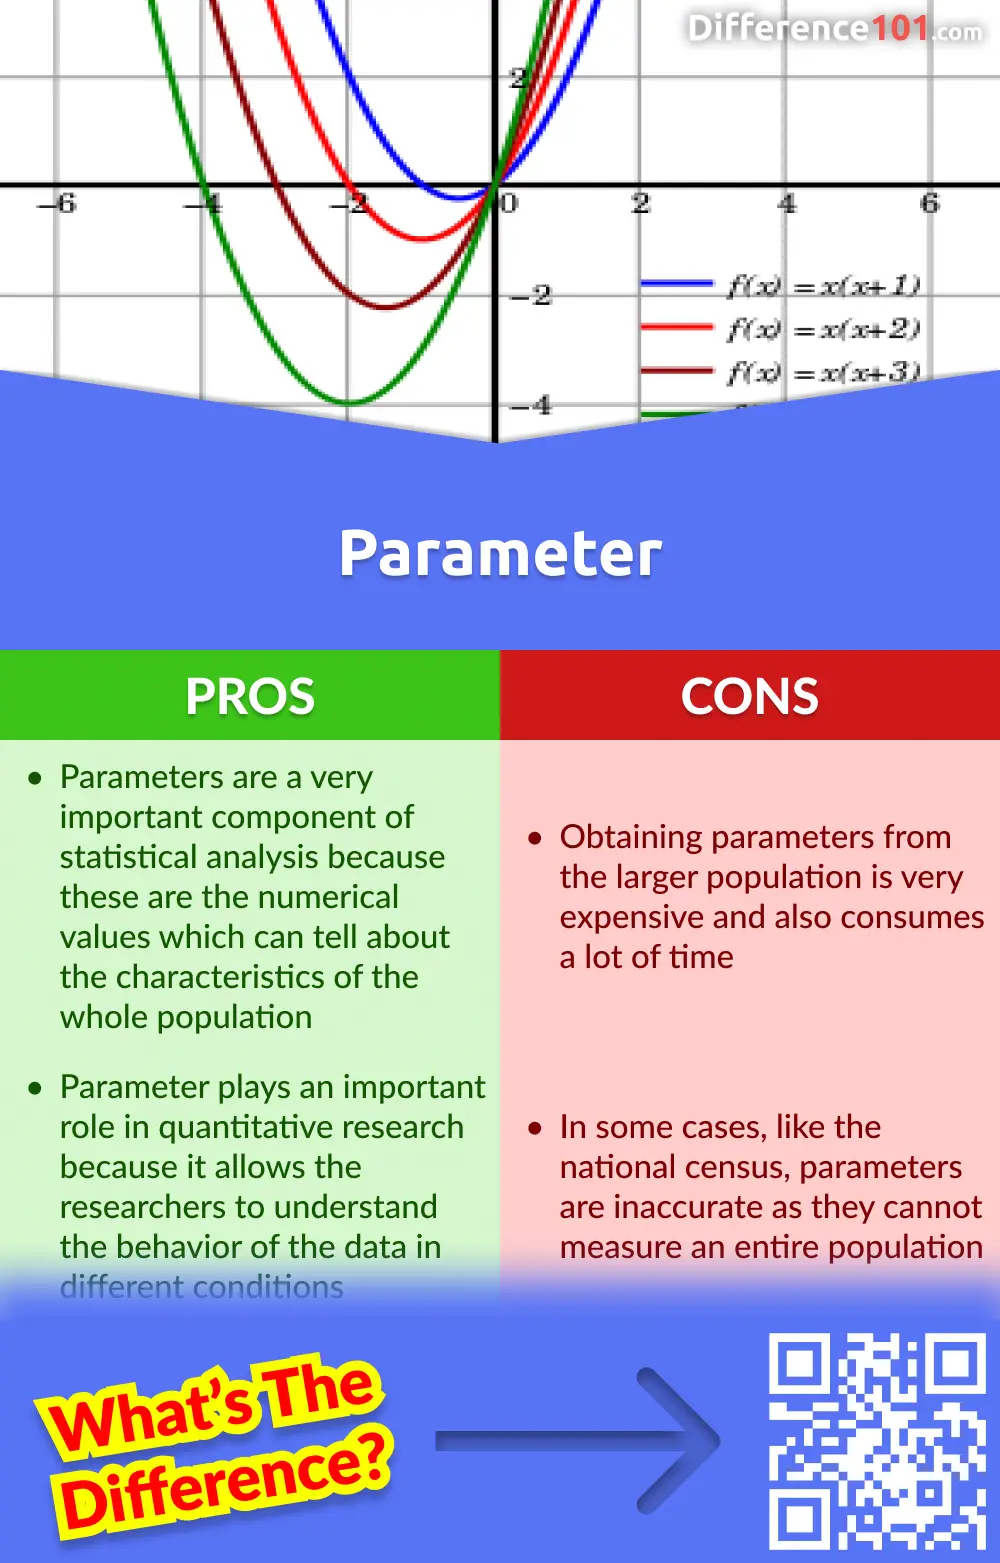 Parameter Pros and Cons